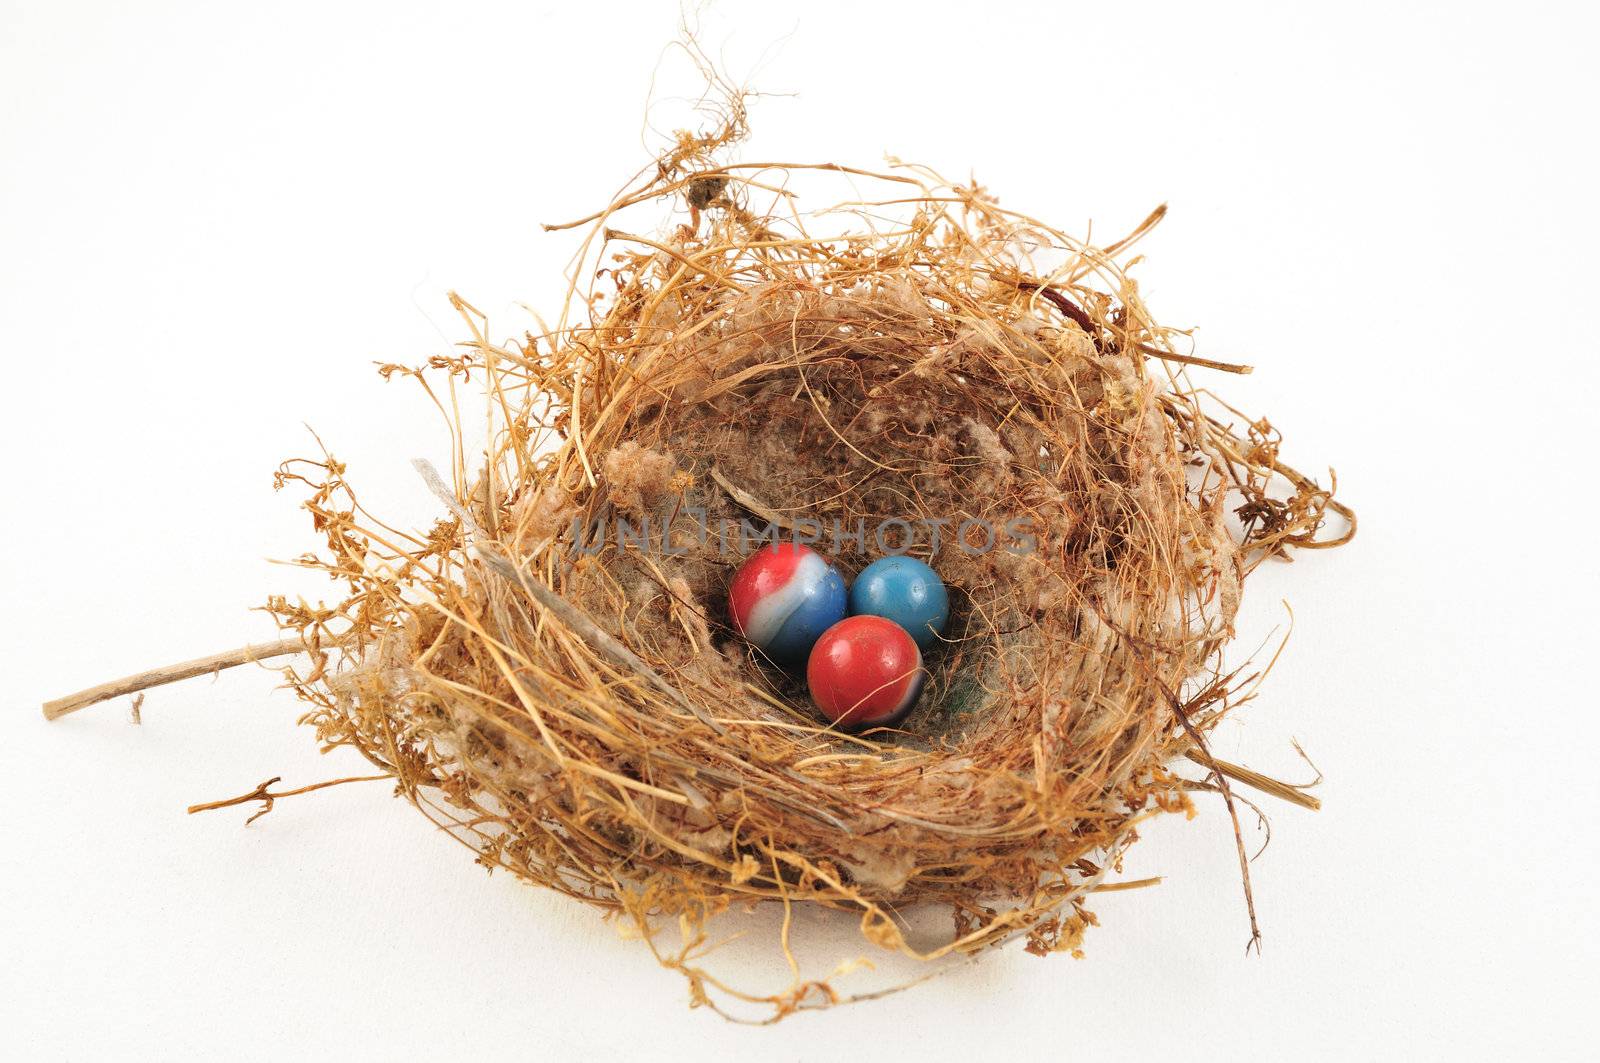 three marbles in a little bird's nest of twigs